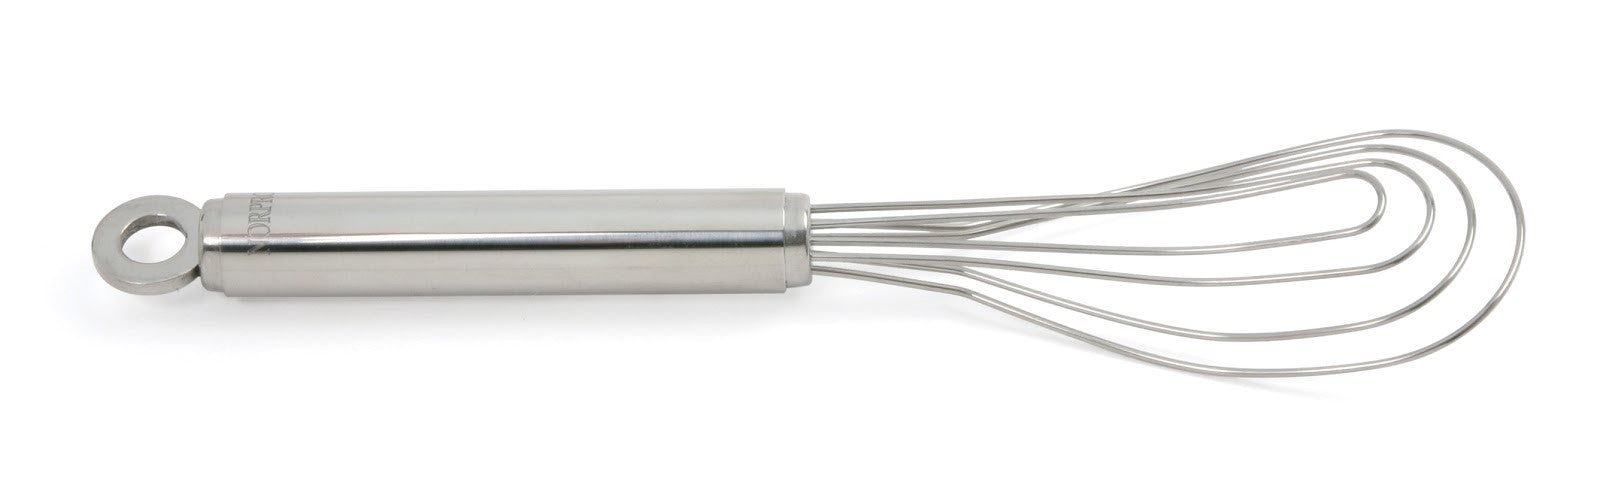 Norpro 11 in. Flat Sauce Whisk